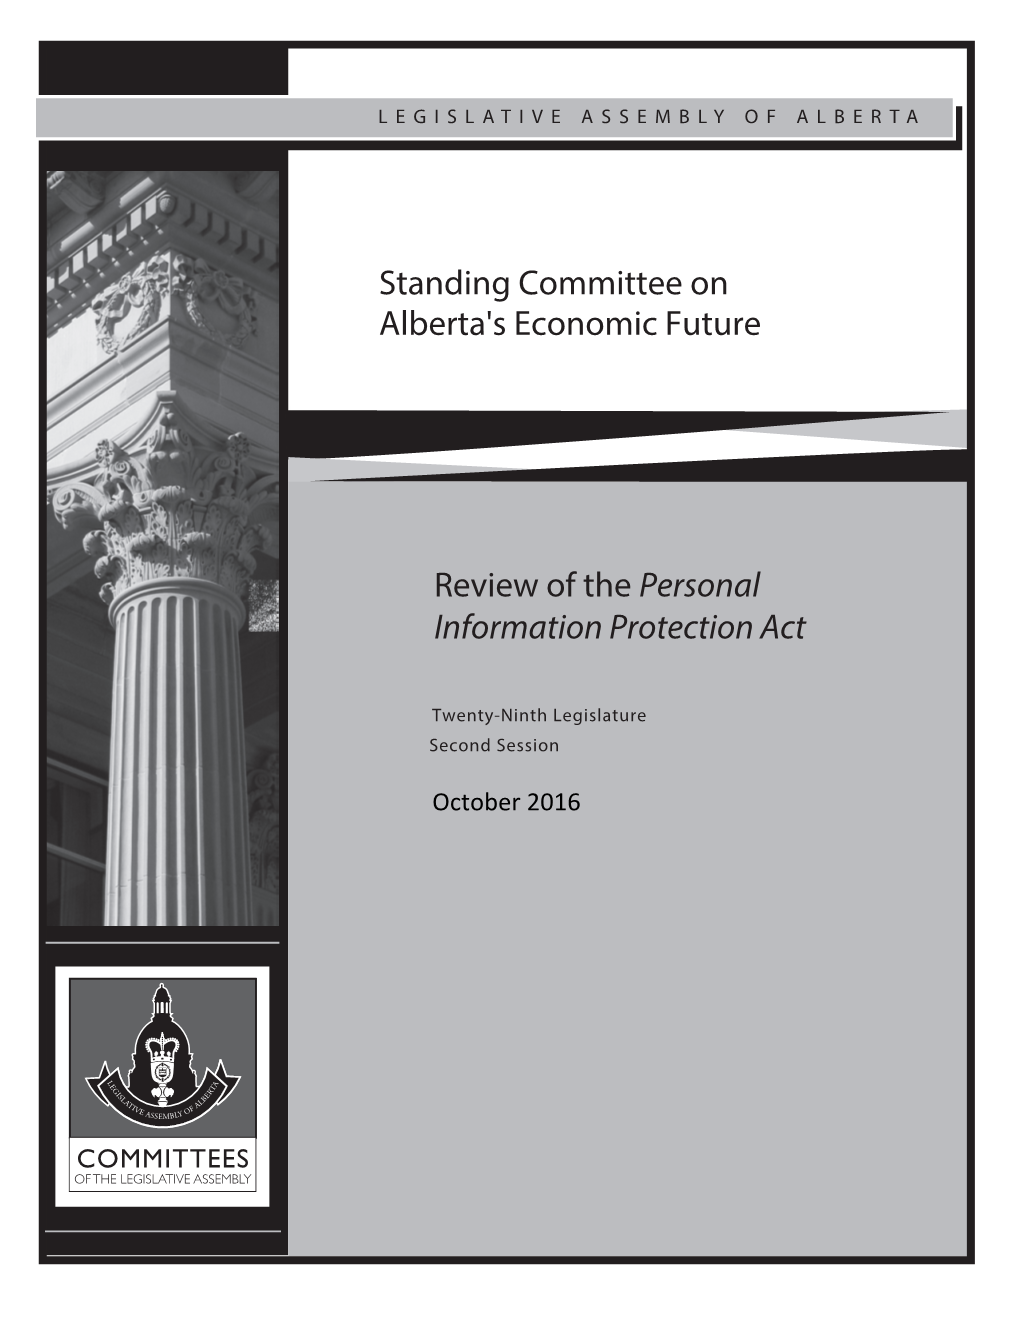 Review of the Personal Information Protection Act